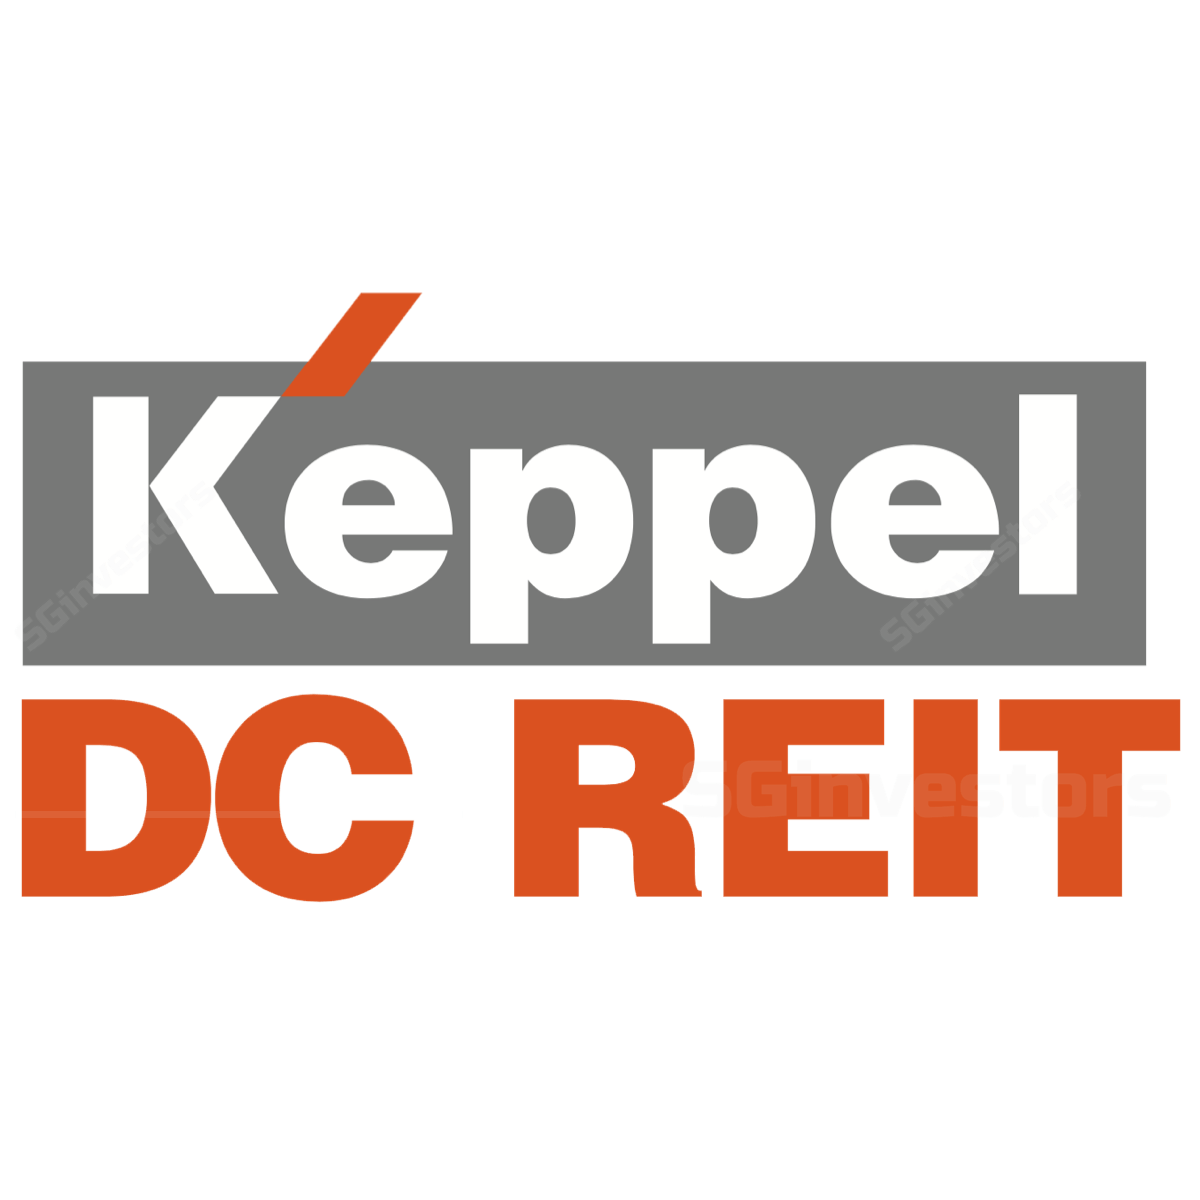 Keppel Logo - 5 things you should know about Keppel DC REIT | PropertyInvestSG